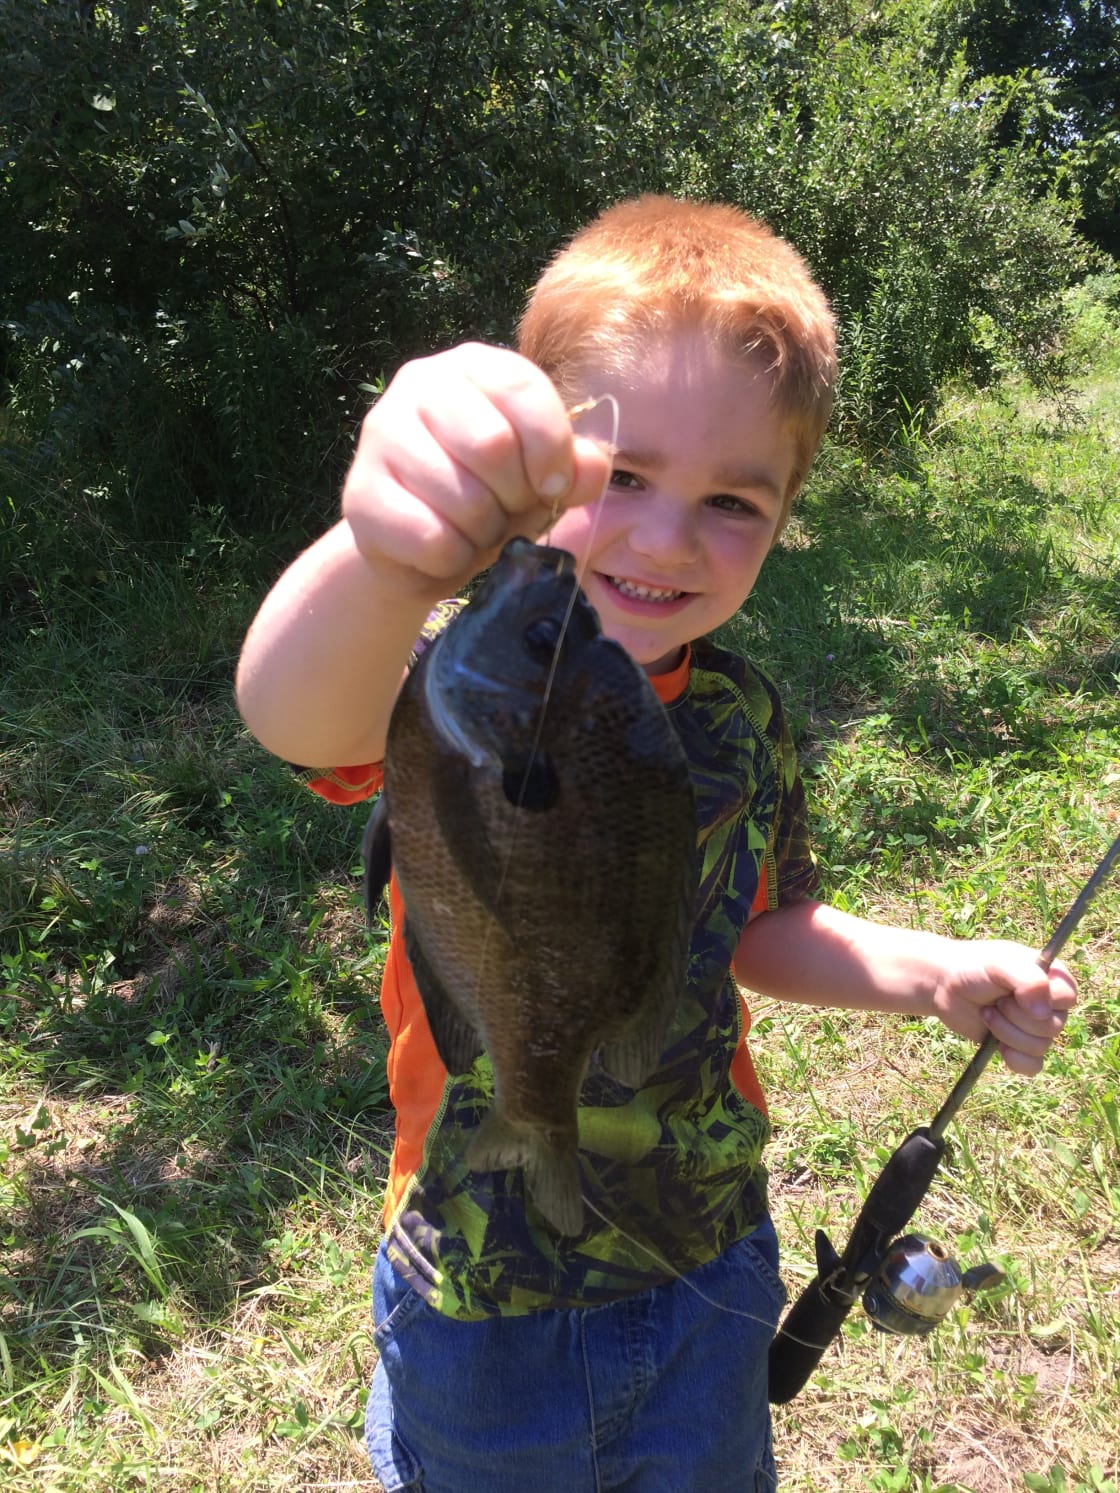 That's a big blue gill for a little boy.